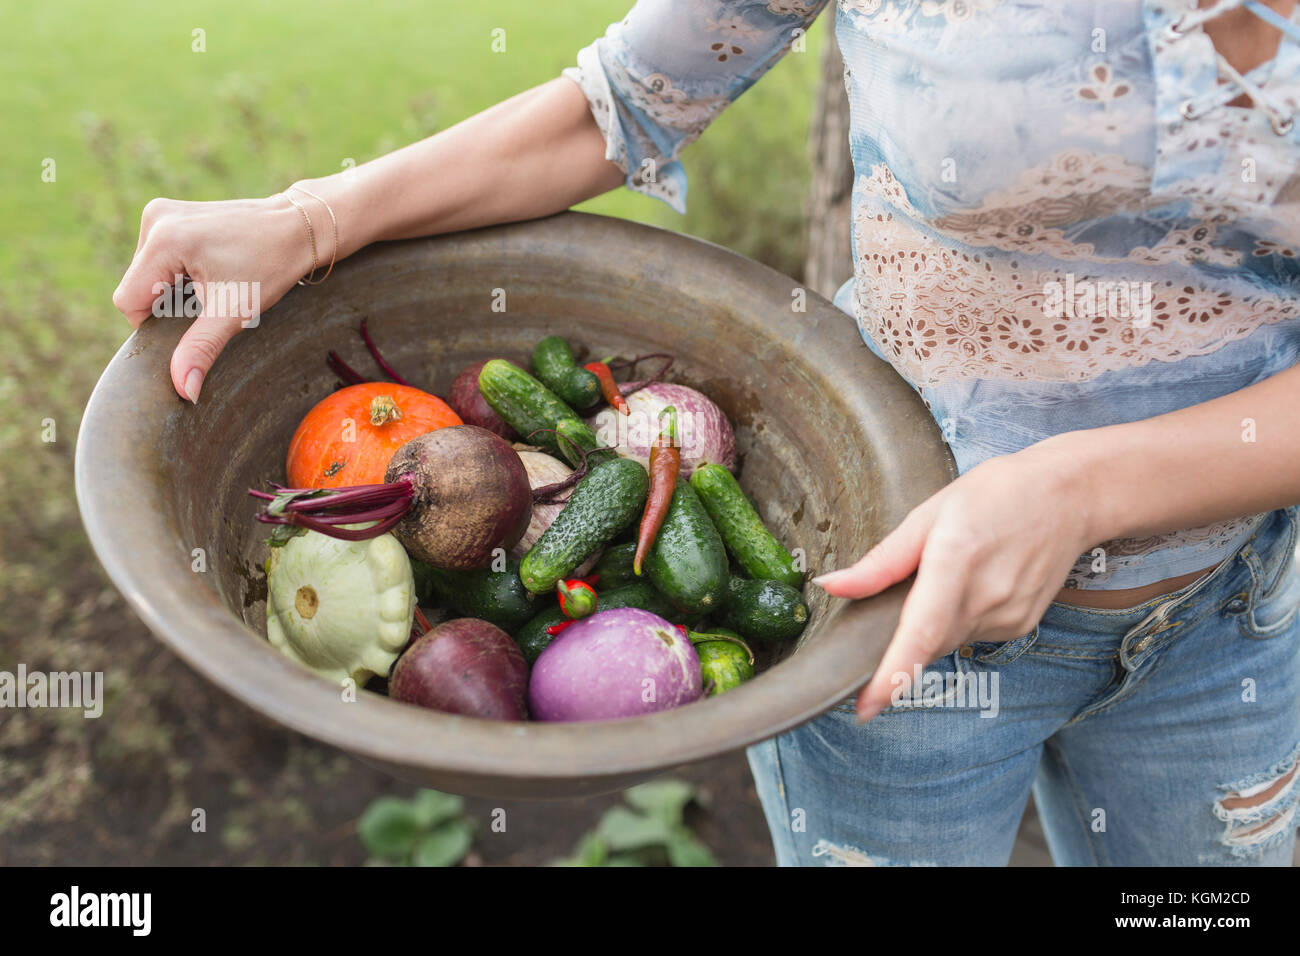 Midsection of woman holding vegetables in container Banque D'Images